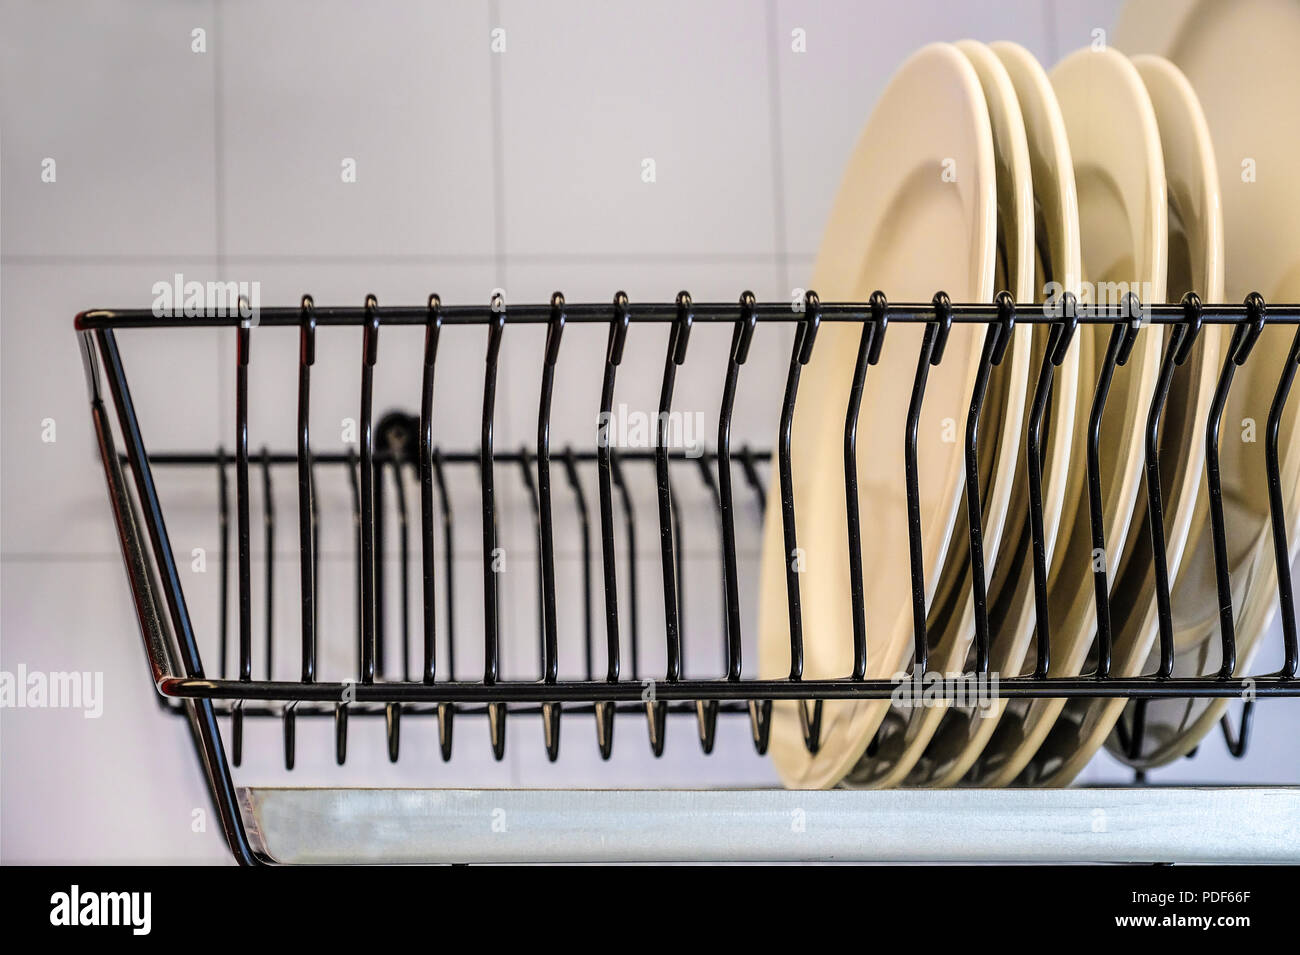 https://c8.alamy.com/comp/PDF66F/white-dishes-drying-on-metal-dish-rack-dish-drying-rack-the-dryer-is-fixed-horizontally-on-the-wall-PDF66F.jpg